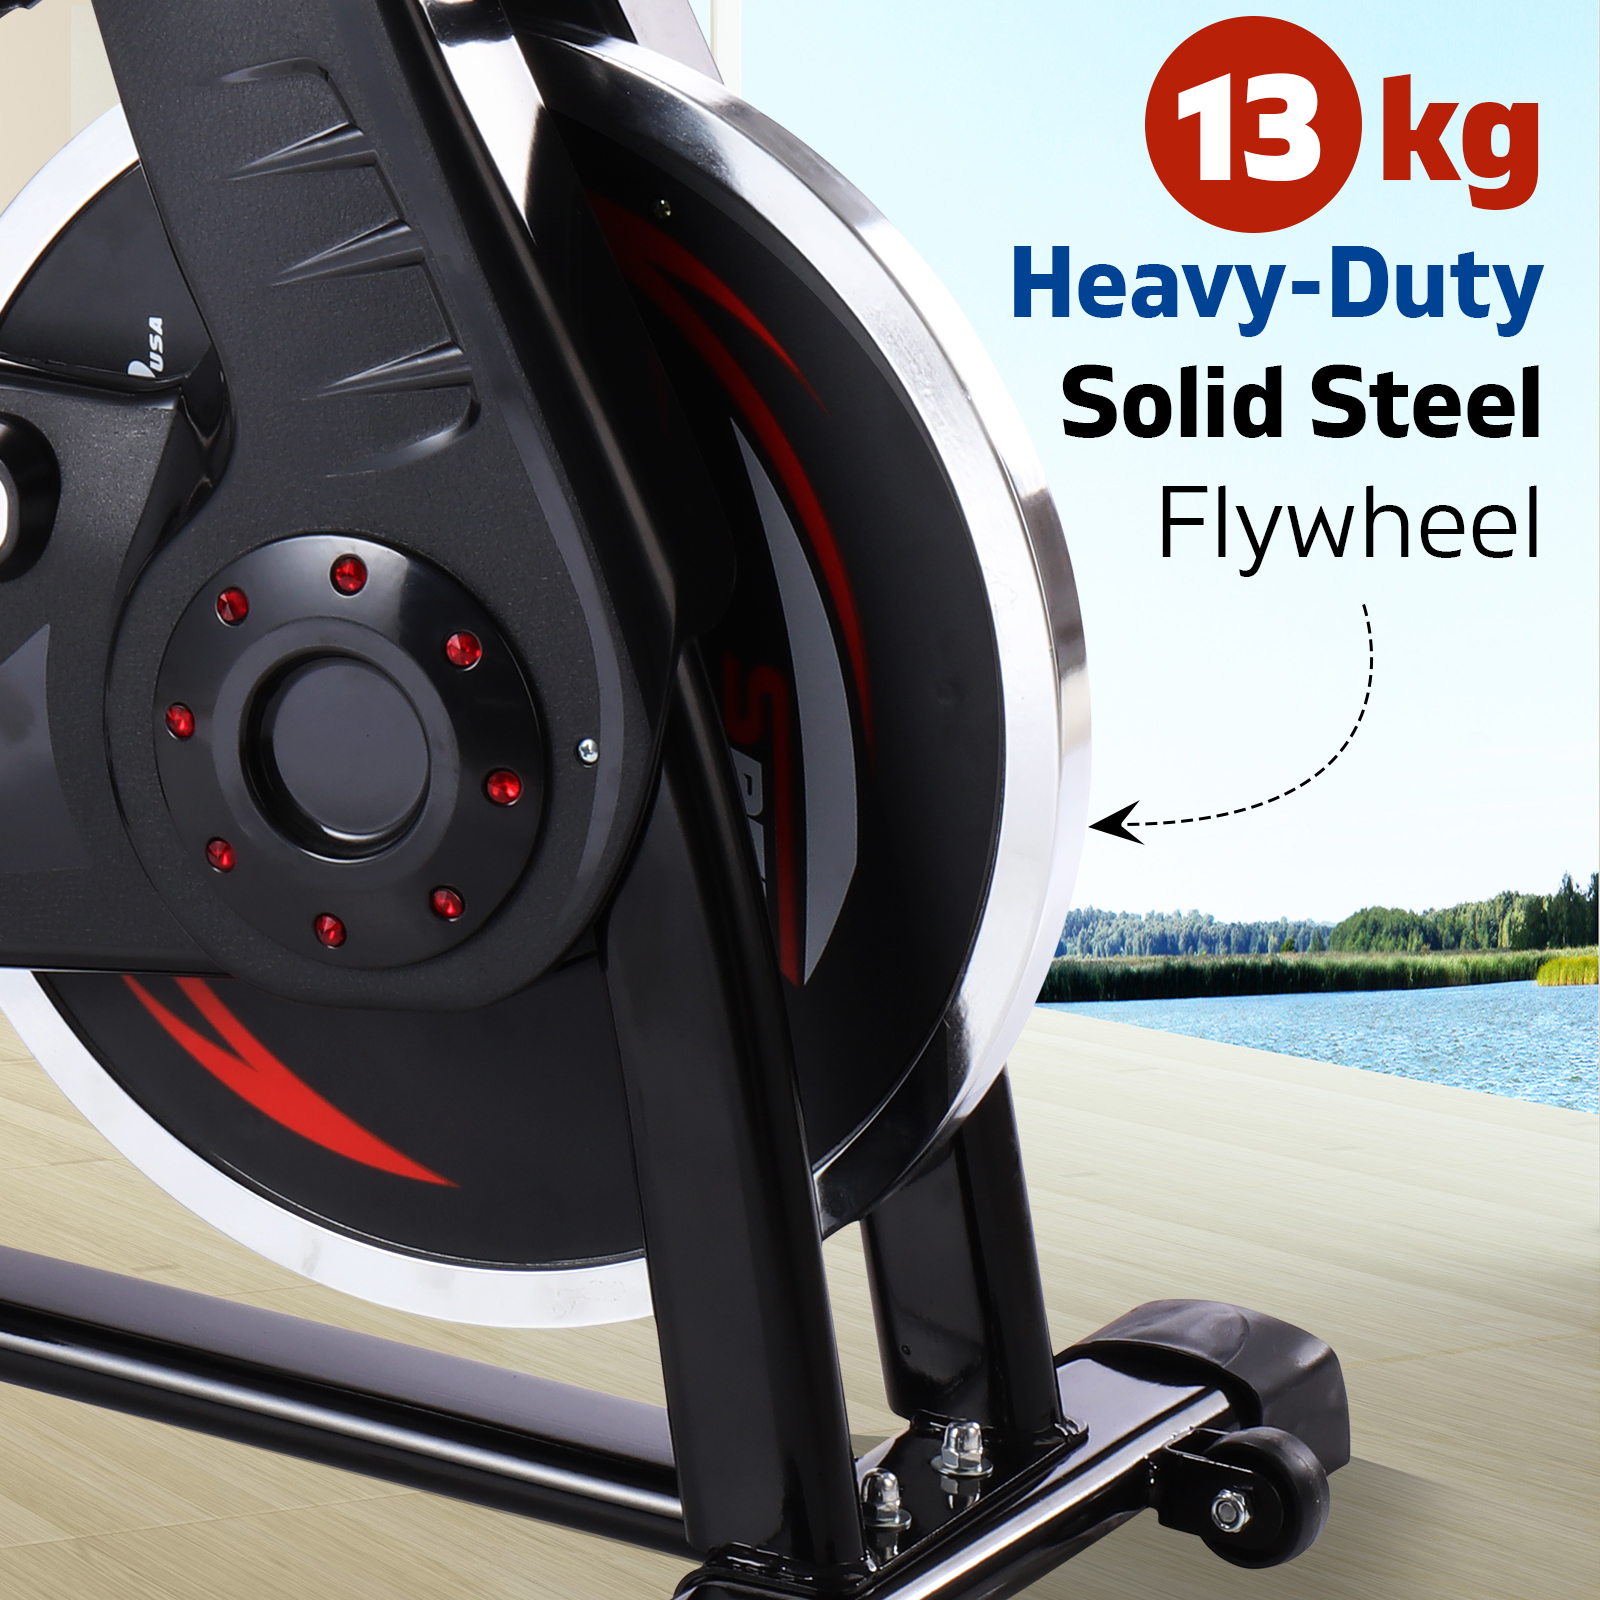 NORFLX Spin Bike Flywheel Commercial Gym Exercise Home Workout Bike Fitness Black